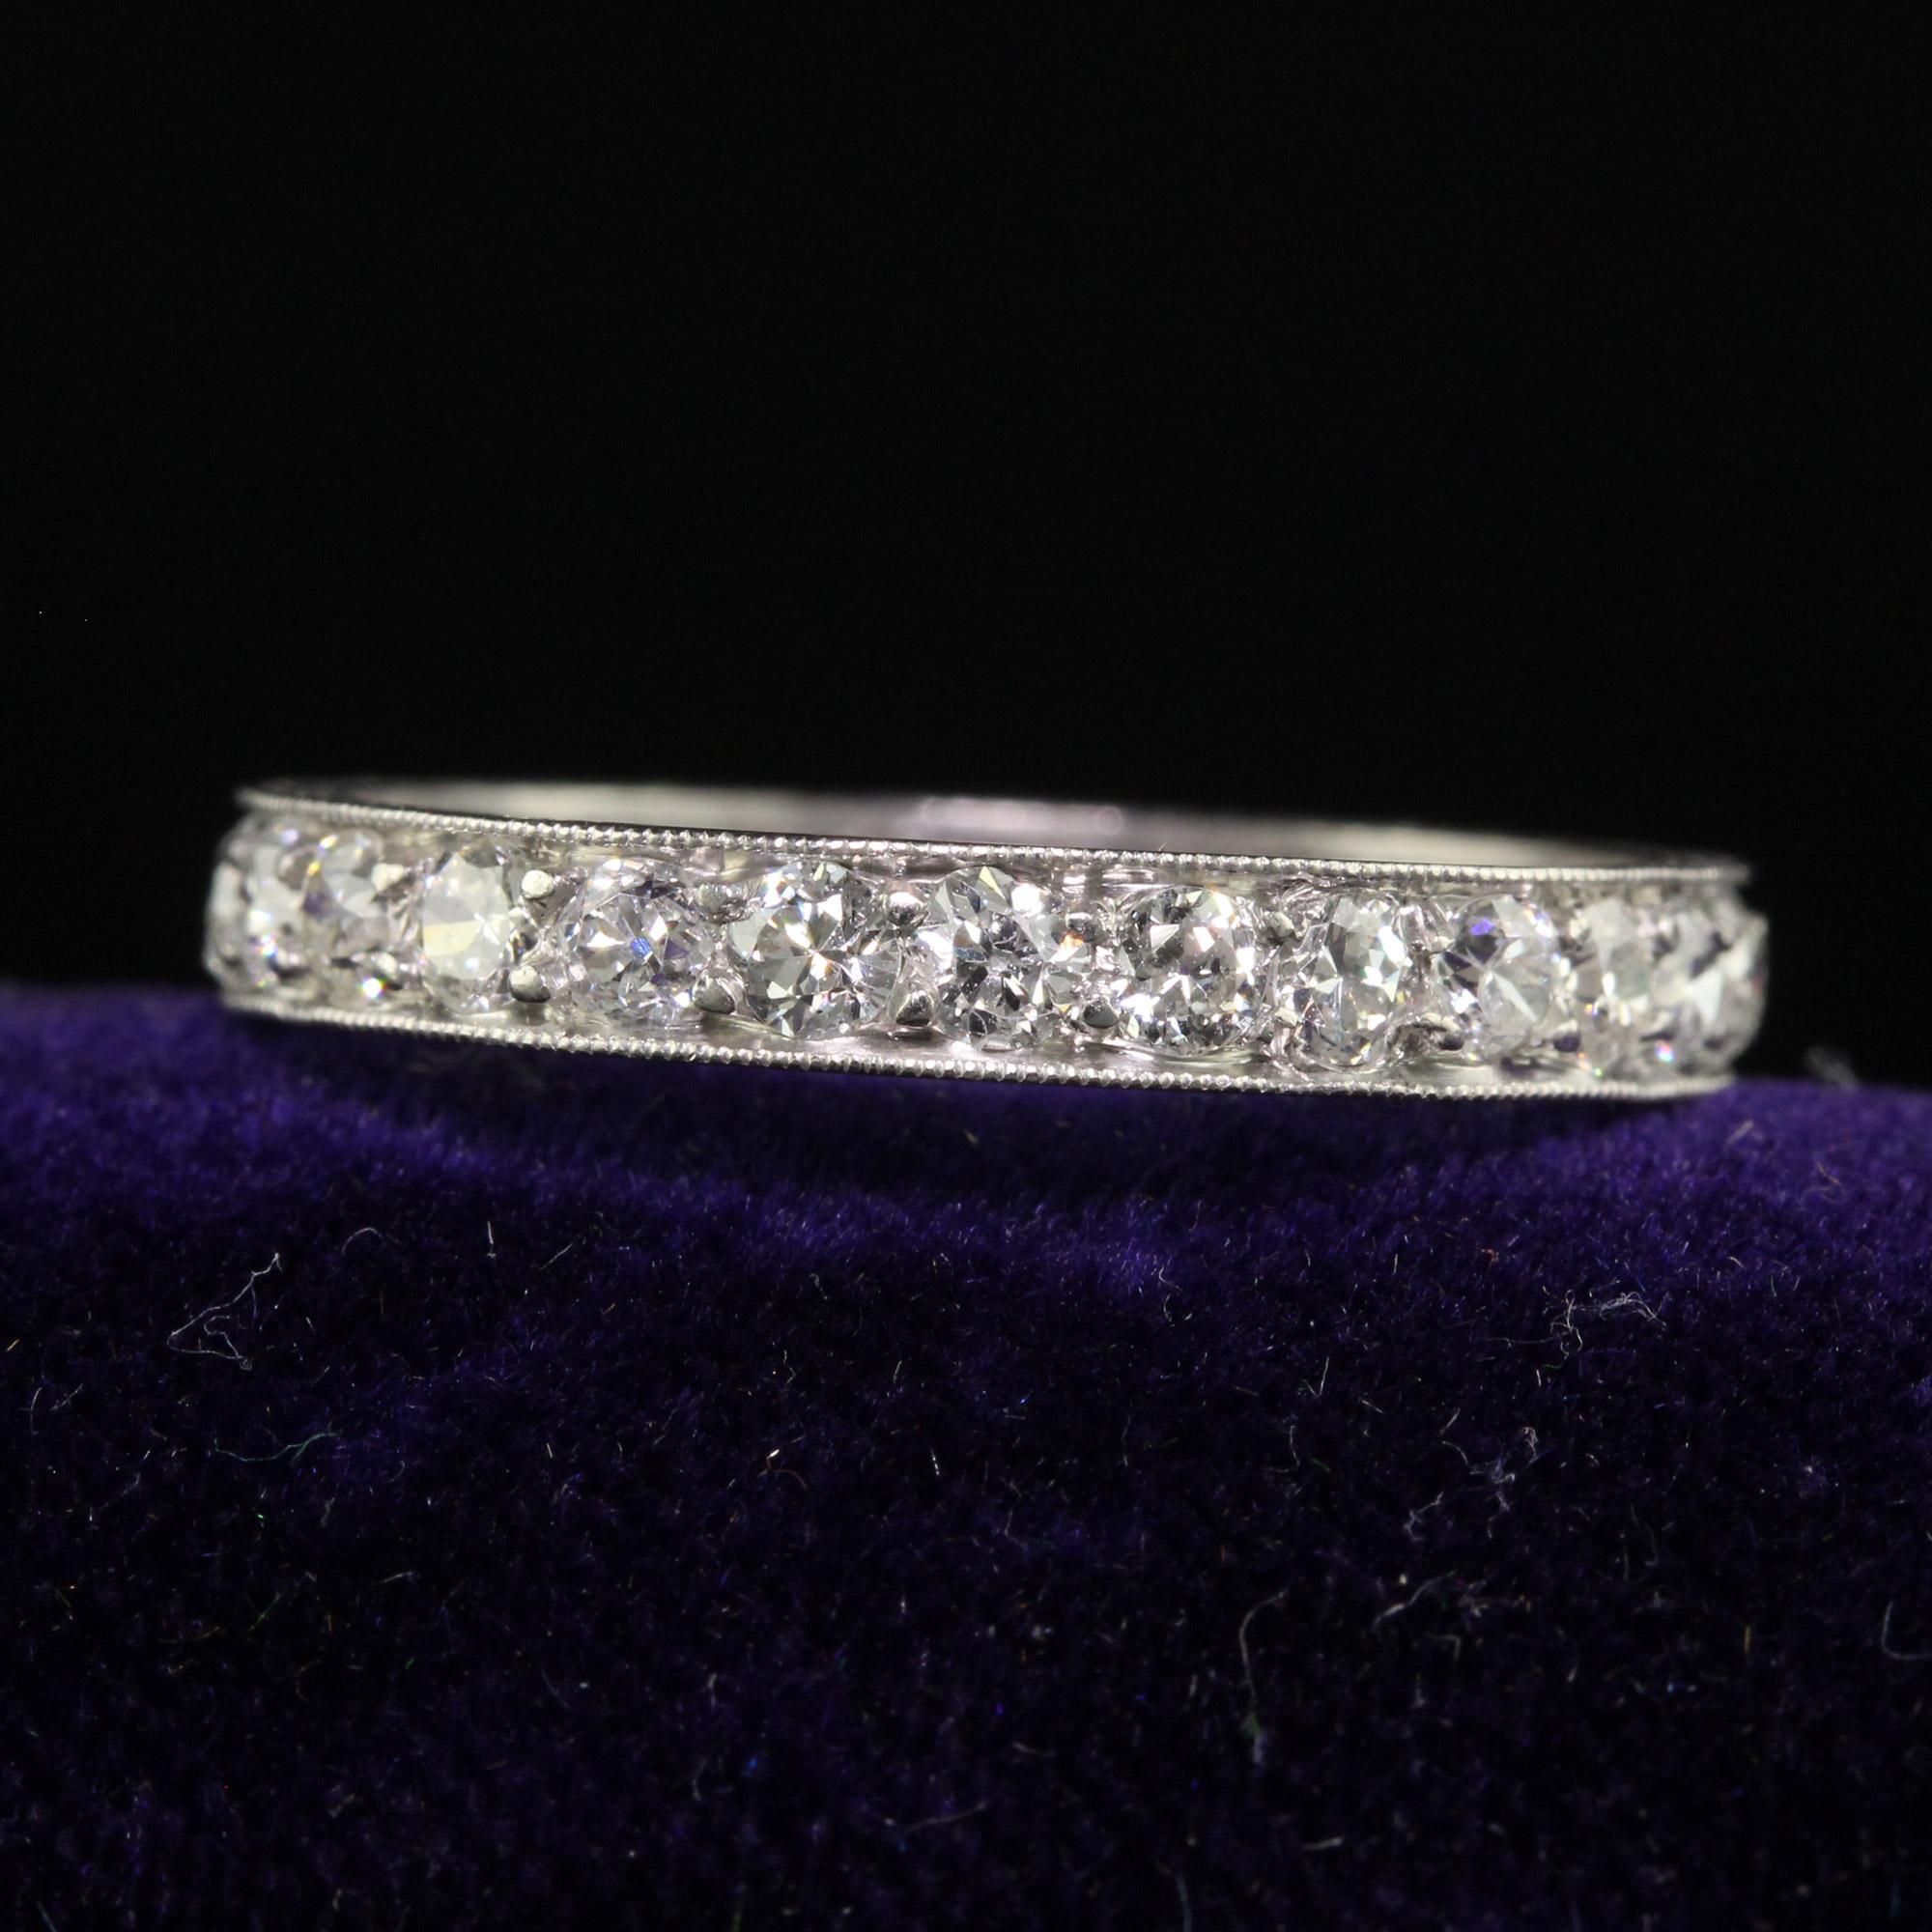 Beautiful Antique Art Deco Platinum Old Mine Diamond Engraved Eternity Band - Size 7 3/4. This incredible old mine diamond eternity band is crafted in platinum. The ring has old mine cut diamonds set around the entire band and the sides of the ring